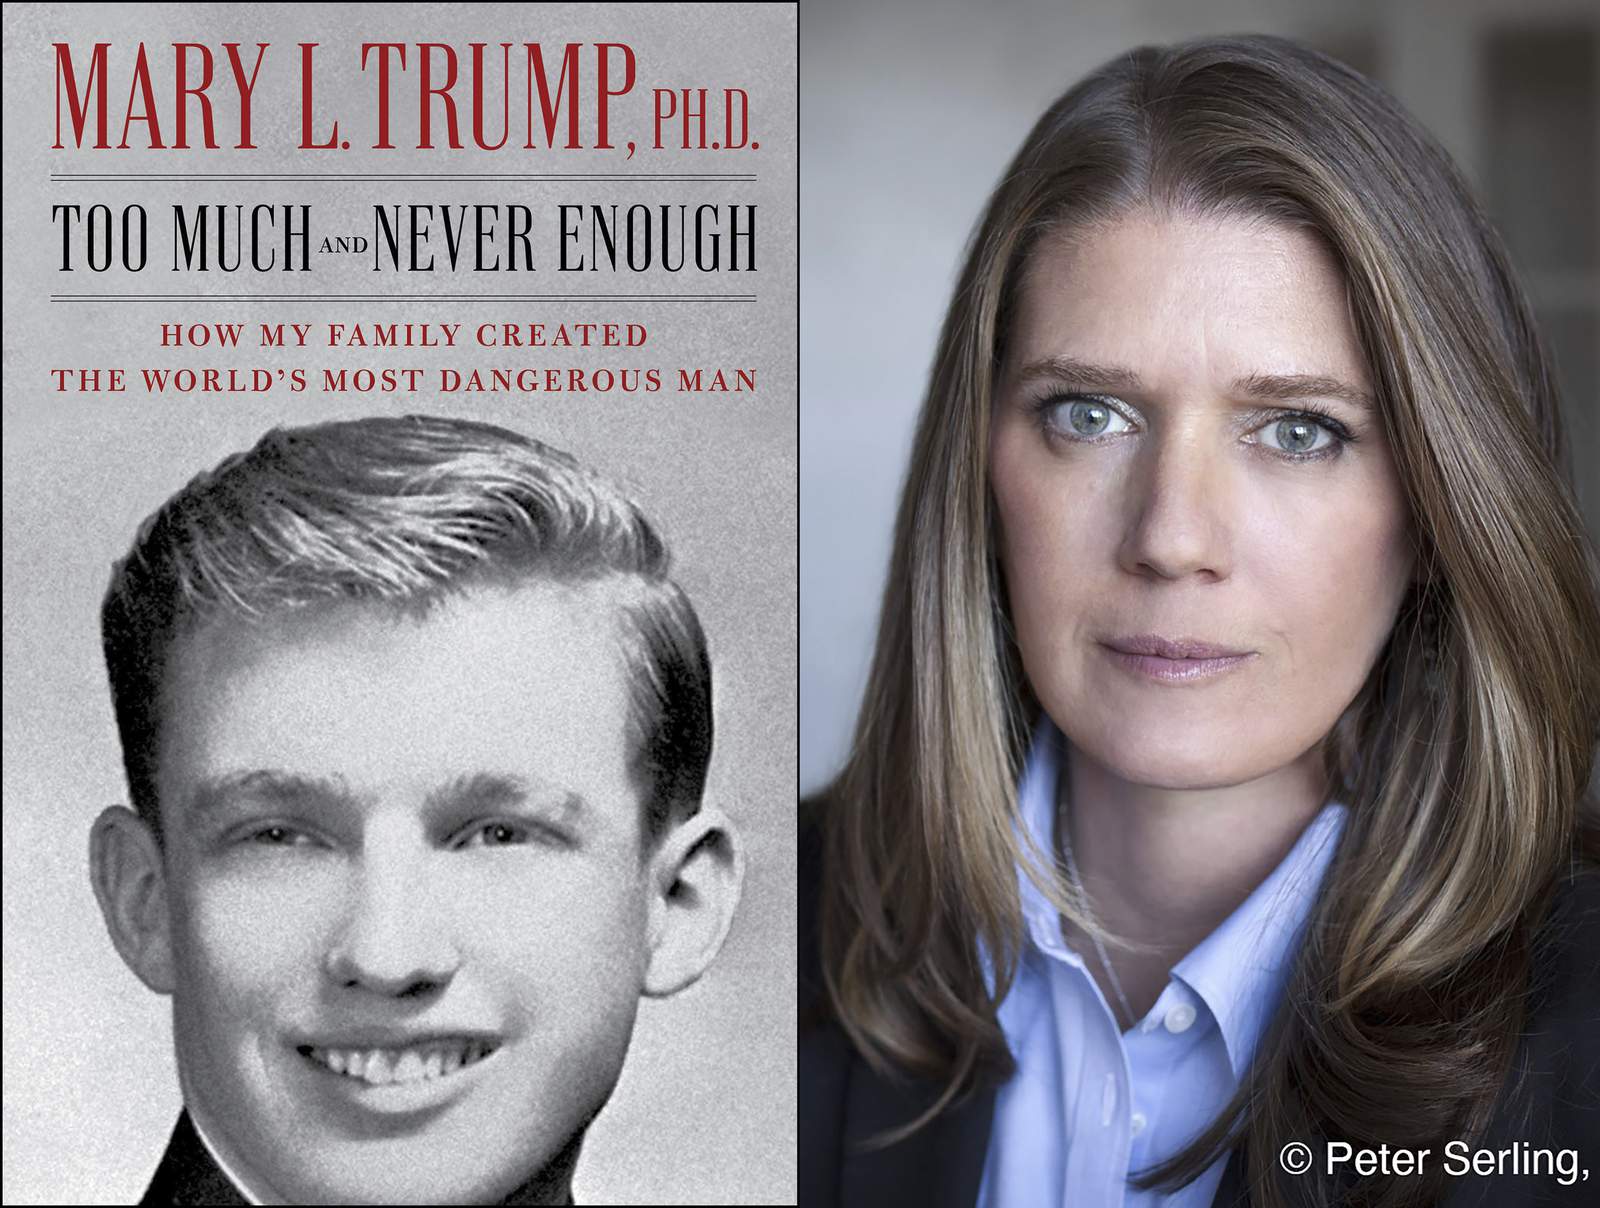 Judge rules Mary Trump can publicize book about her uncle President Trump